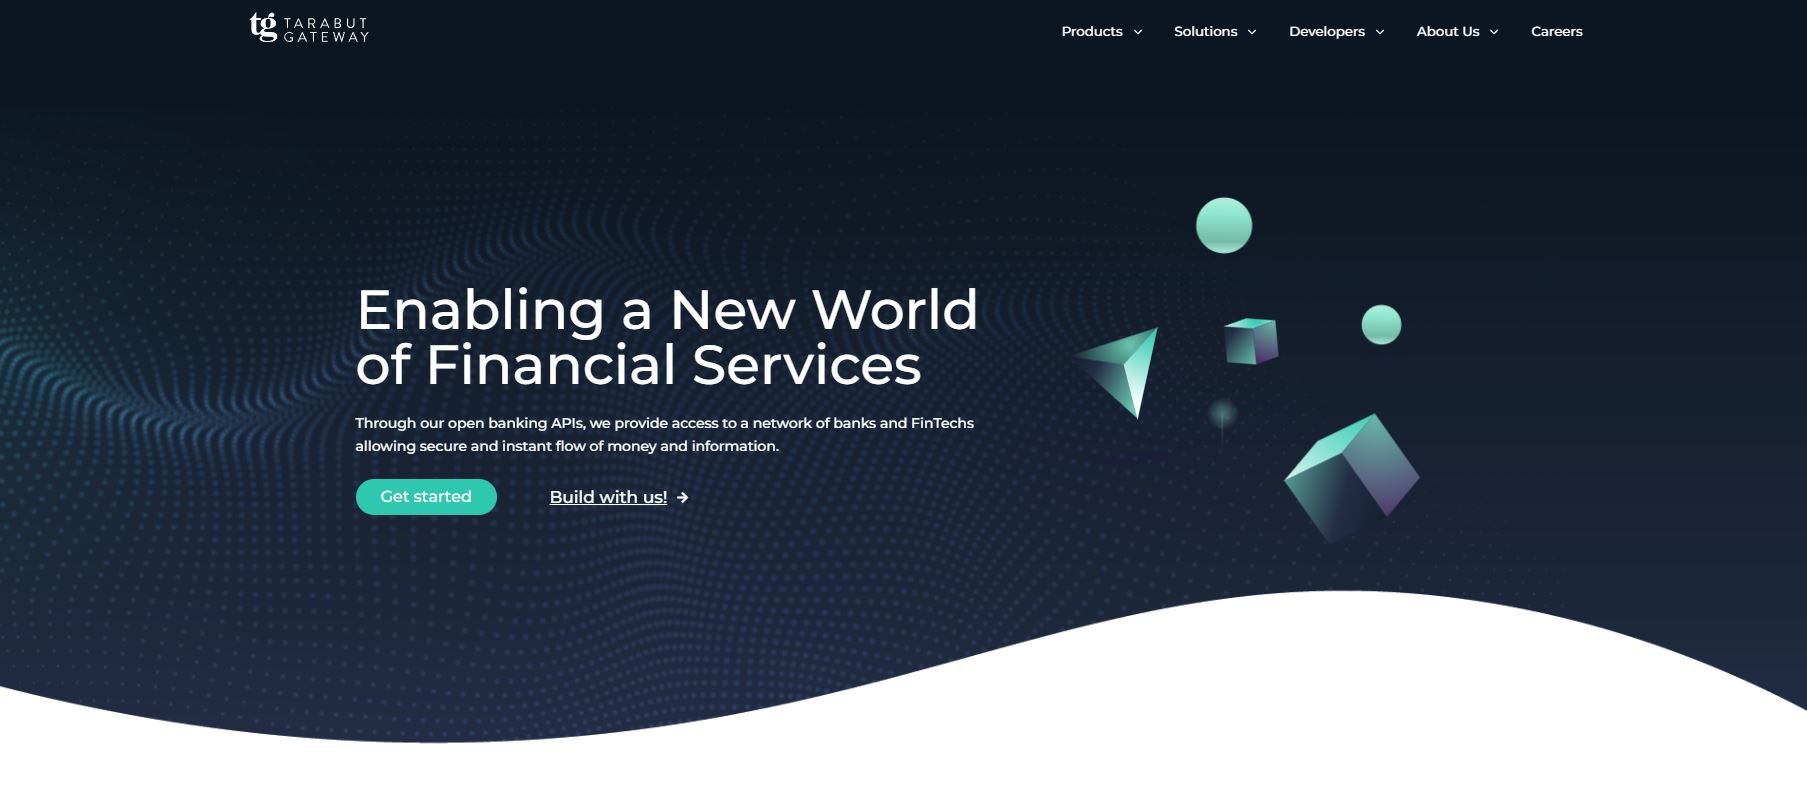 Recently raising $32M in Series A funding, Tarabut Gateway is on a mission to empower and accelerate the creation and distribution of personalized financial services